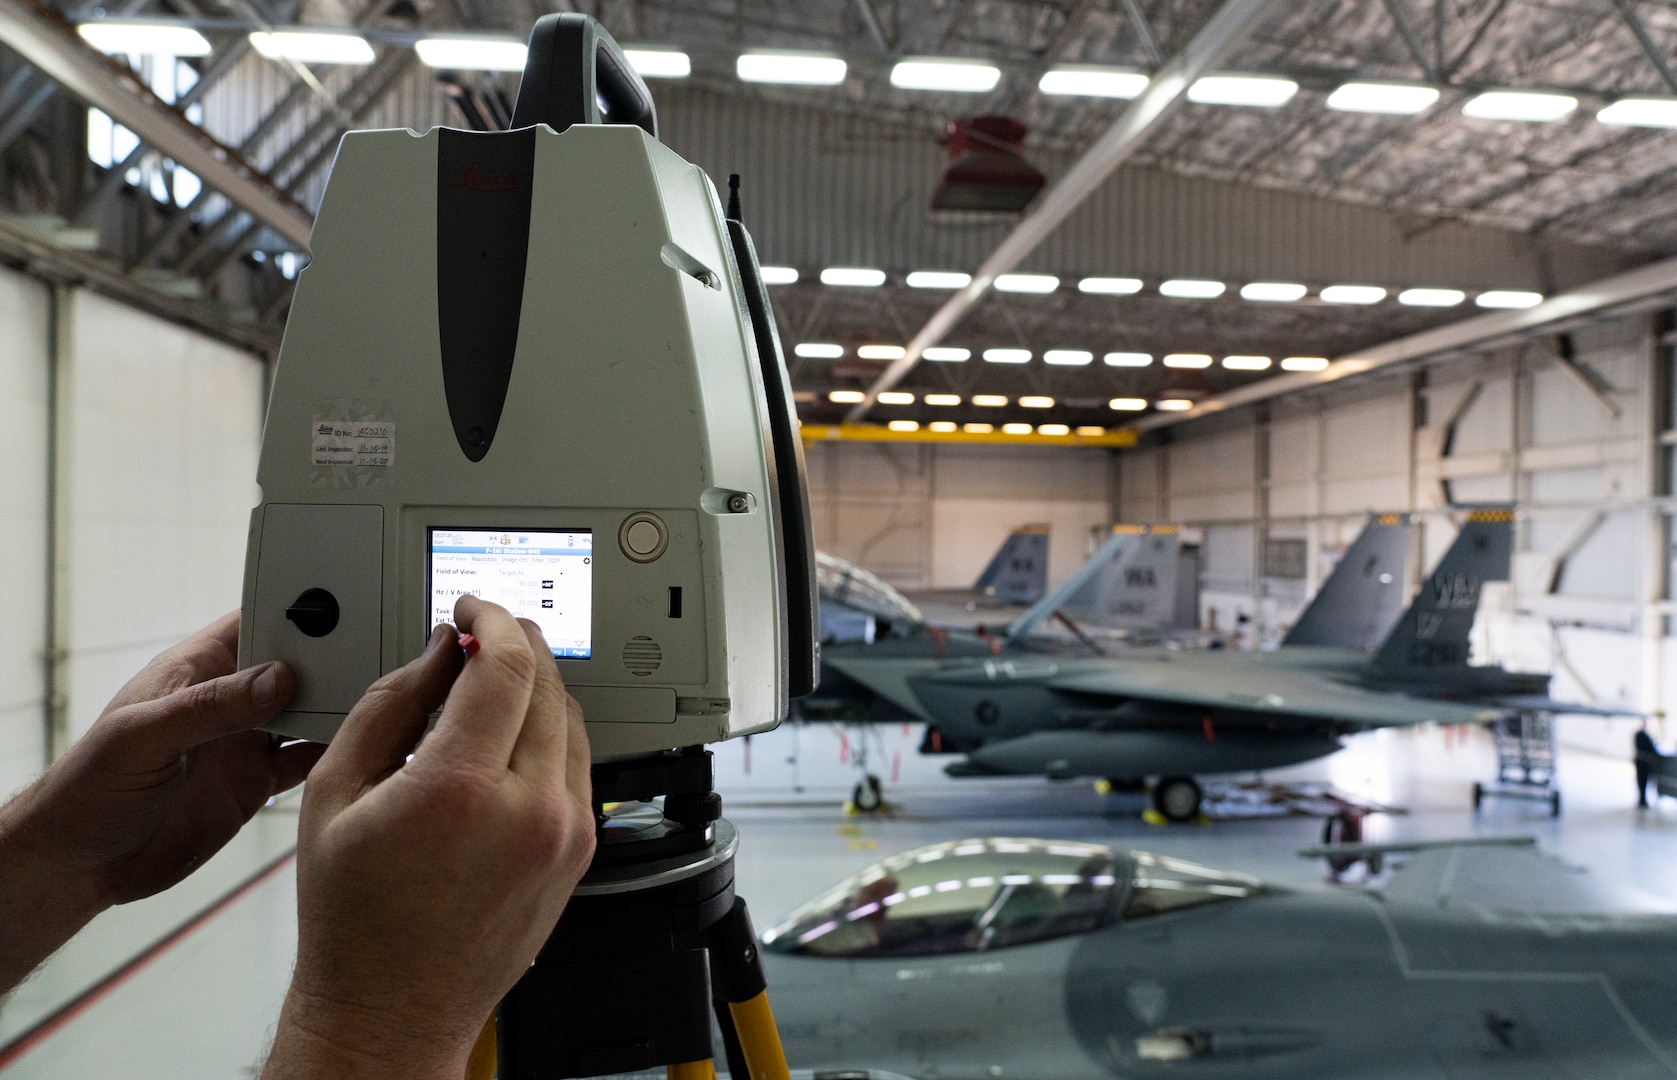 3d imaging equipment with planes in background